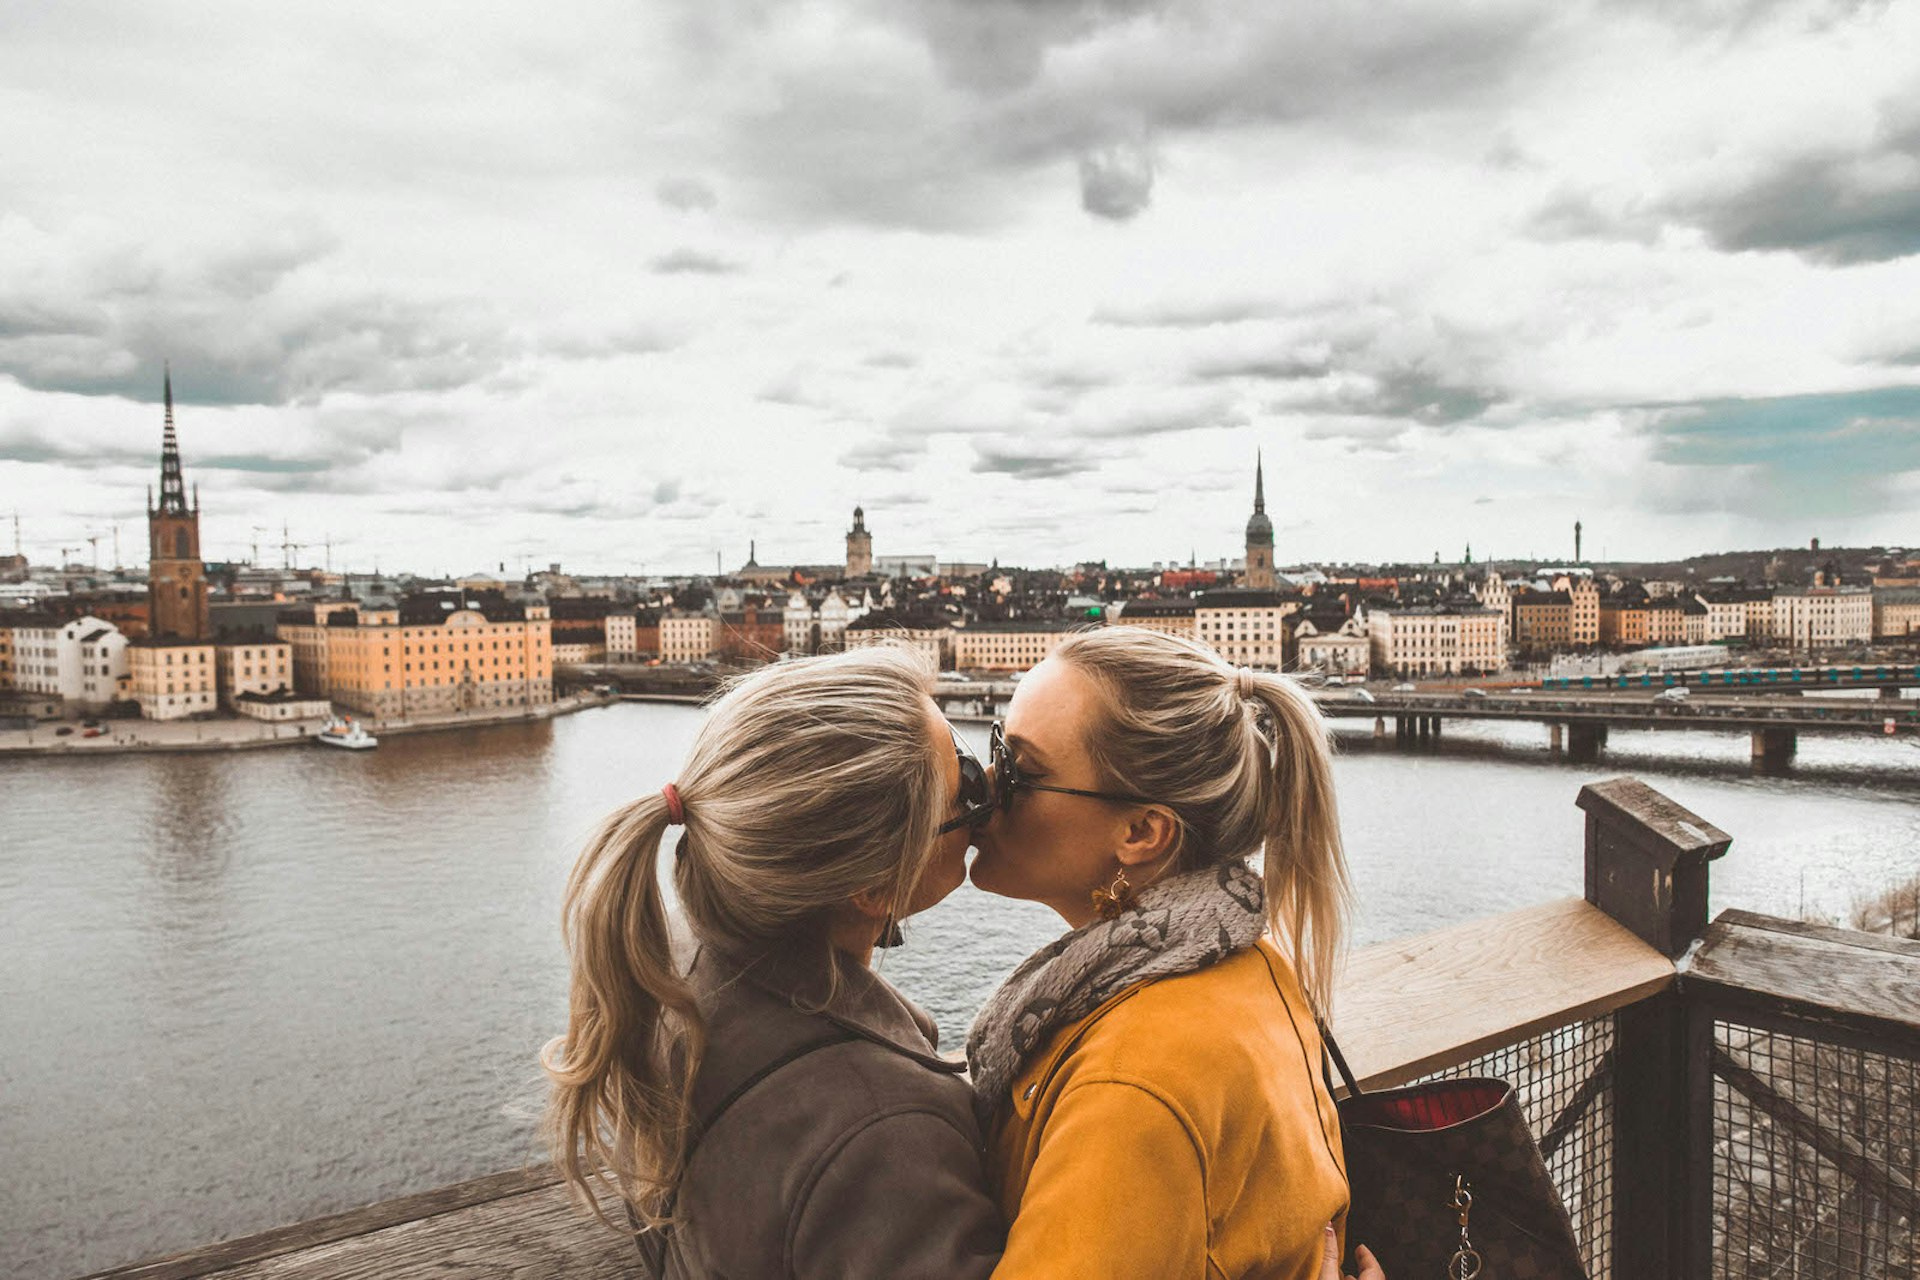 Married couple Whitney & Megan kissing with view of Stockholm behind them © Megan & Whitney Bacon-Evans / Lonely Planet